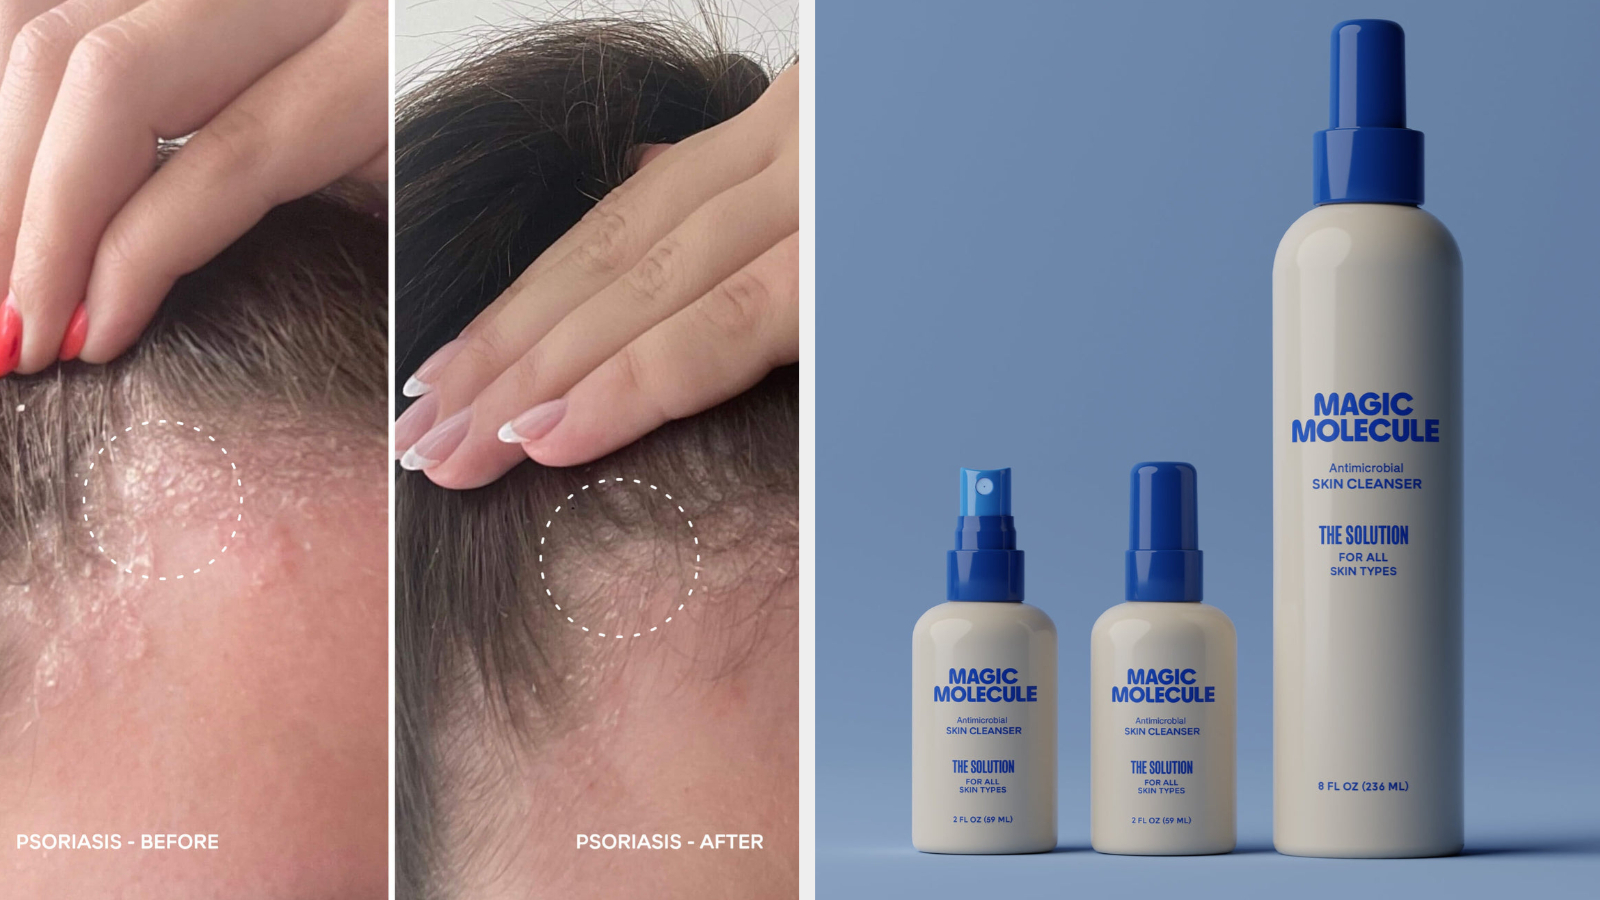 Before and after shots of scalp psoriasis treatment, alongside three Magic Molecule skincare products